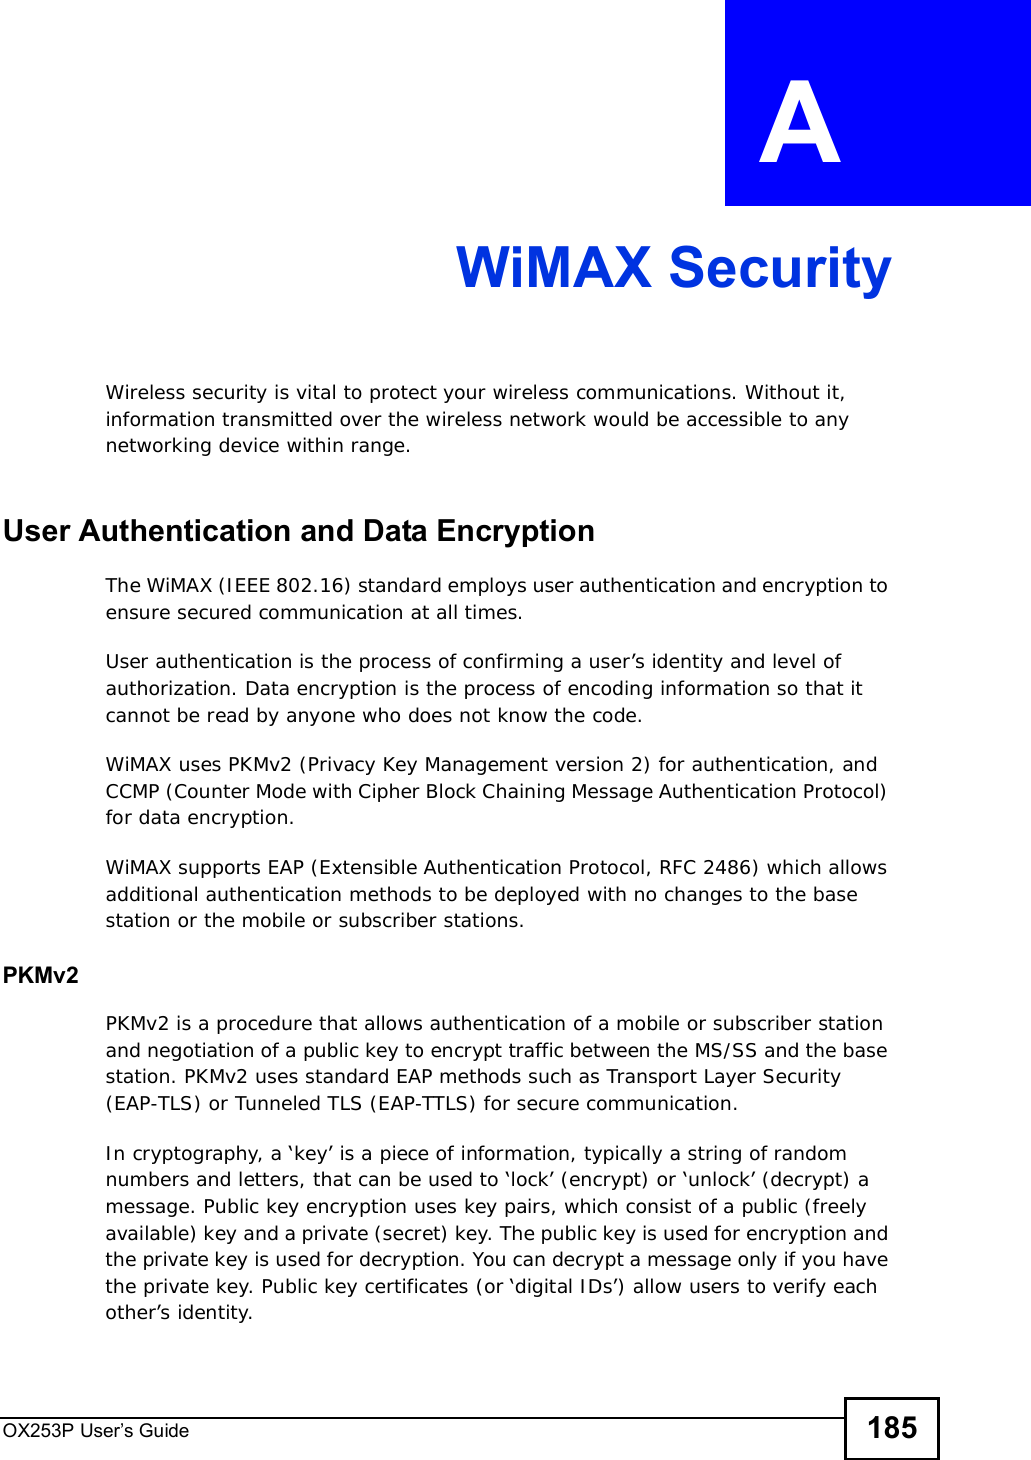 OX253P User’s Guide 185APPENDIX  A WiMAX SecurityWireless security is vital to protect your wireless communications. Without it, information transmitted over the wireless network would be accessible to any networking device within range.User Authentication and Data EncryptionThe WiMAX (IEEE 802.16) standard employs user authentication and encryption to ensure secured communication at all times.User authentication is the process of confirming a user’s identity and level of authorization. Data encryption is the process of encoding information so that it cannot be read by anyone who does not know the code. WiMAX uses PKMv2 (Privacy Key Management version 2) for authentication, and CCMP (Counter Mode with Cipher Block Chaining Message Authentication Protocol) for data encryption. WiMAX supports EAP (Extensible Authentication Protocol, RFC 2486) which allows additional authentication methods to be deployed with no changes to the base station or the mobile or subscriber stations.PKMv2PKMv2 is a procedure that allows authentication of a mobile or subscriber station and negotiation of a public key to encrypt traffic between the MS/SS and the base station. PKMv2 uses standard EAP methods such as Transport Layer Security (EAP-TLS) or Tunneled TLS (EAP-TTLS) for secure communication. In cryptography, a ‘key’ is a piece of information, typically a string of random numbers and letters, that can be used to ‘lock’ (encrypt) or ‘unlock’ (decrypt) a message. Public key encryption uses key pairs, which consist of a public (freely available) key and a private (secret) key. The public key is used for encryption and the private key is used for decryption. You can decrypt a message only if you have the private key. Public key certificates (or ‘digital IDs’) allow users to verify each other’s identity. 